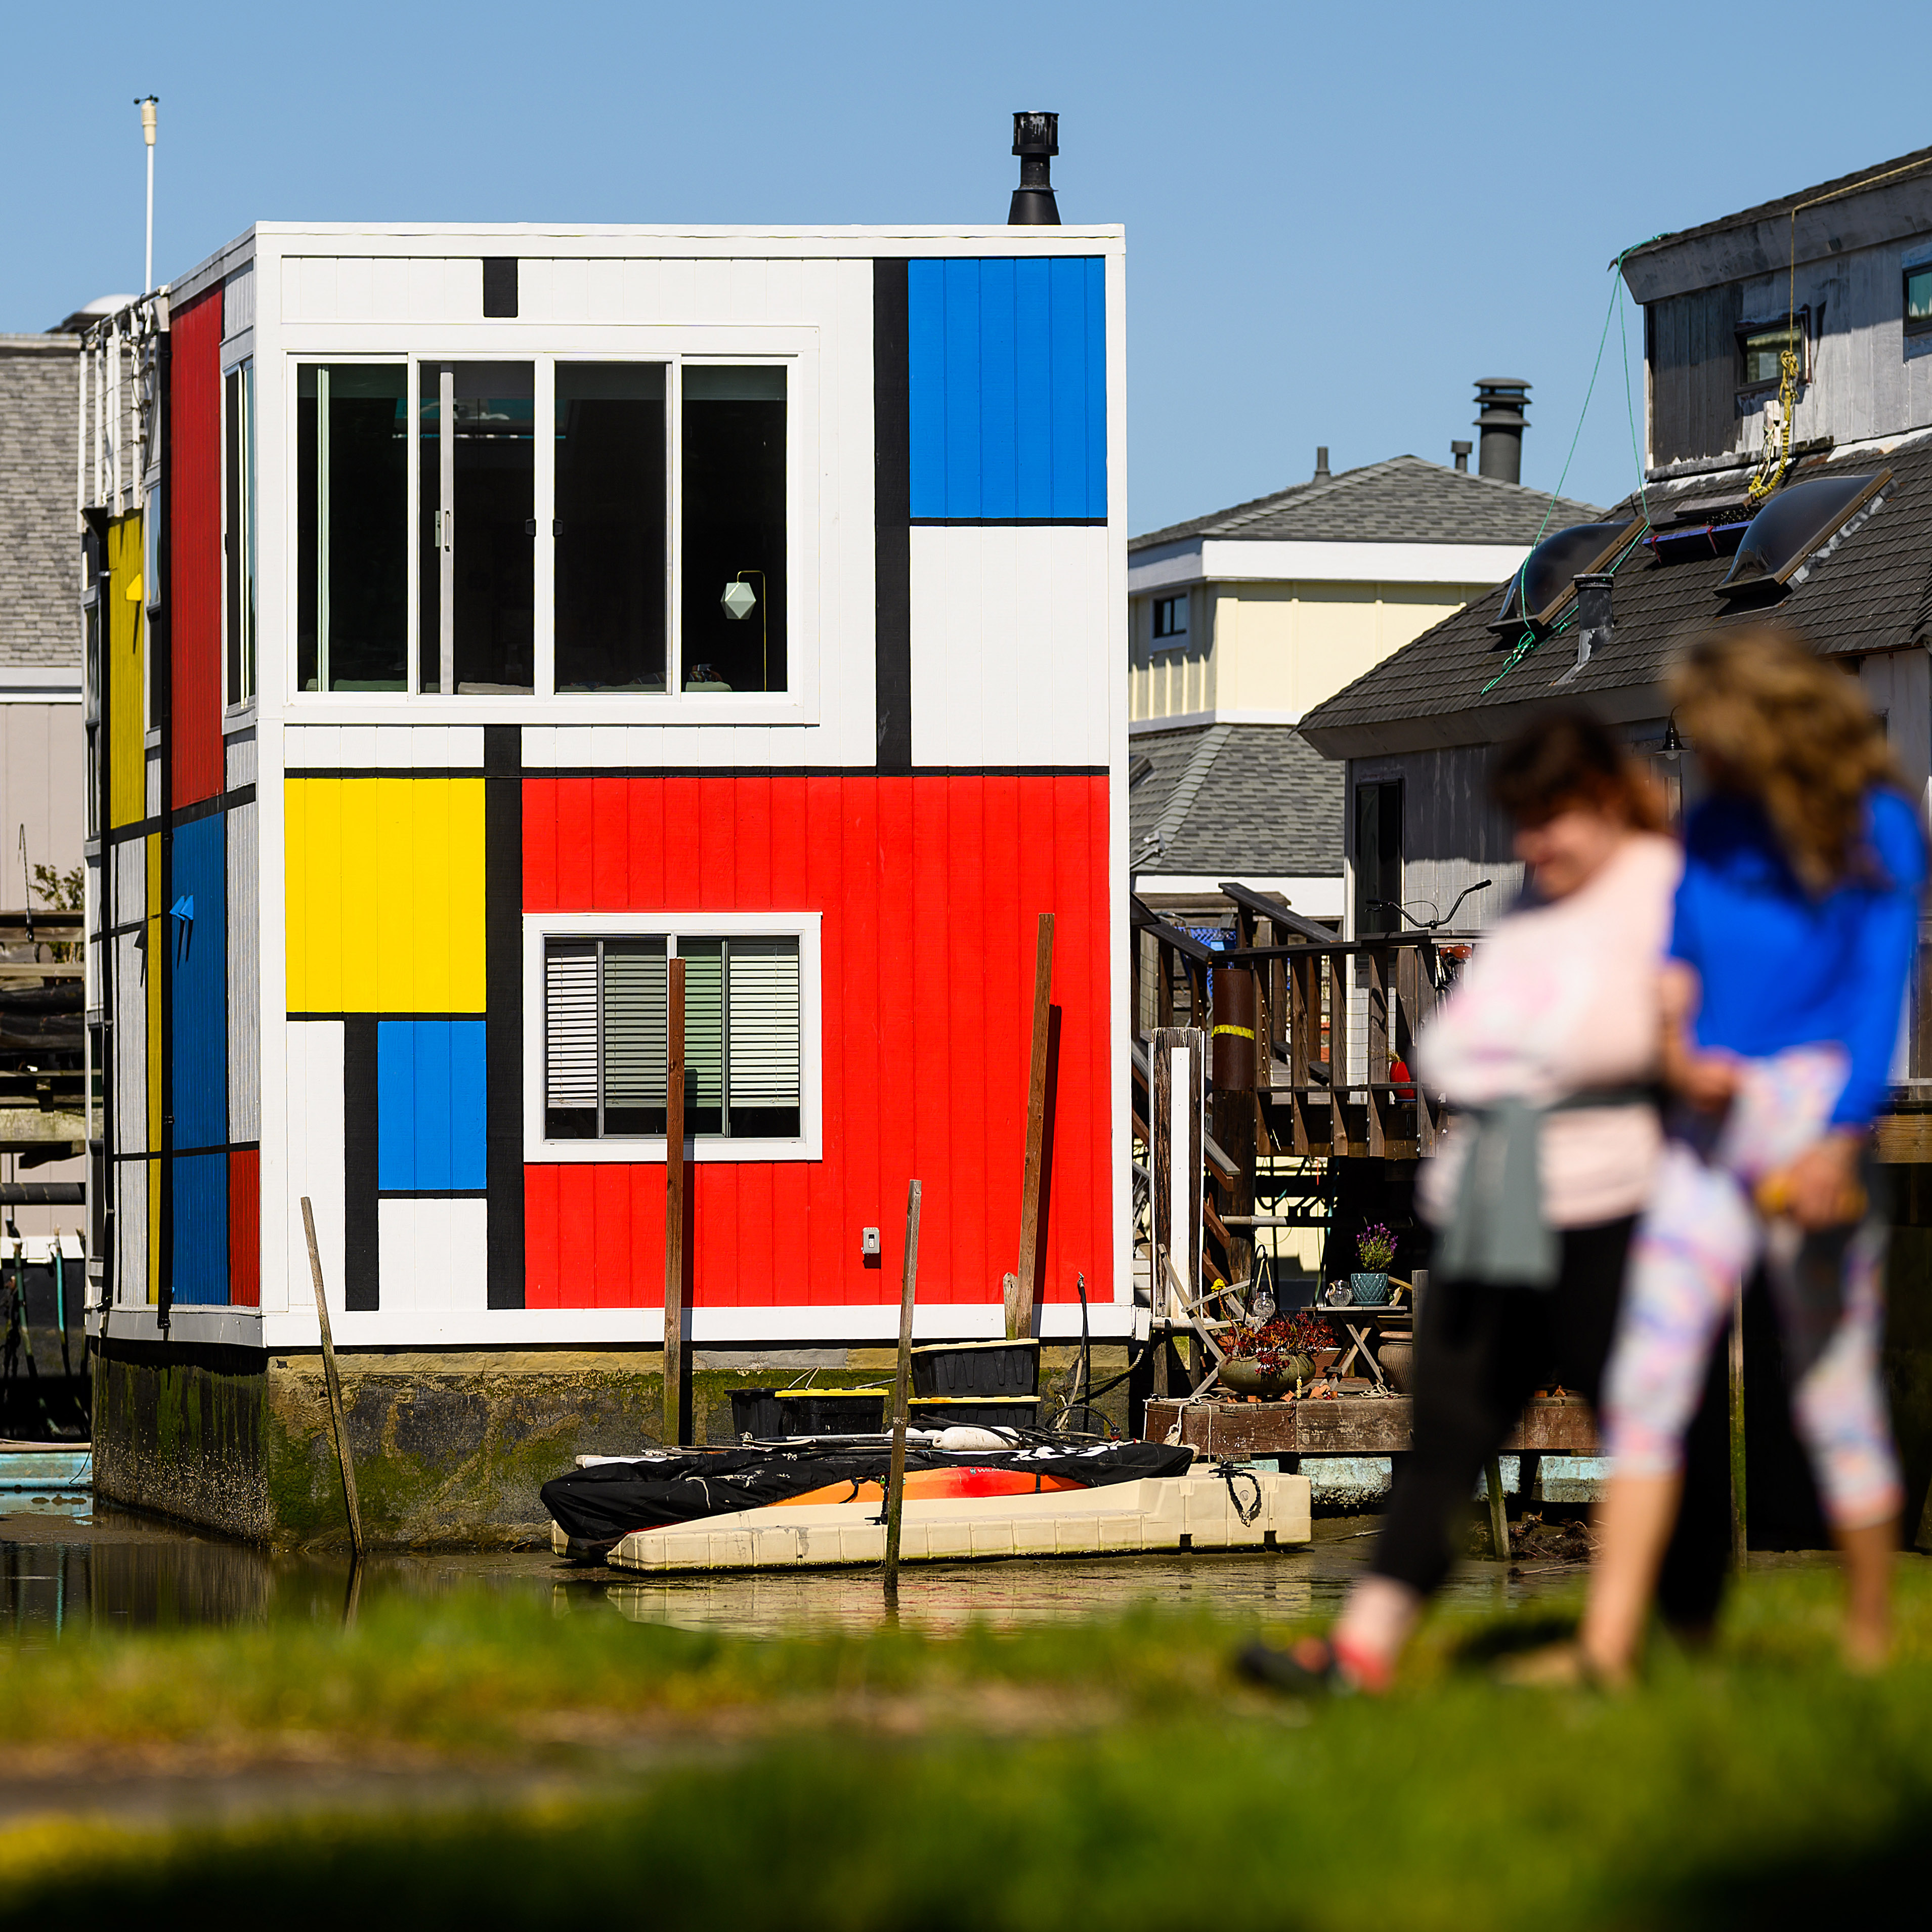 Colorful Mondrian-style house by water, with blurred people walking in front.